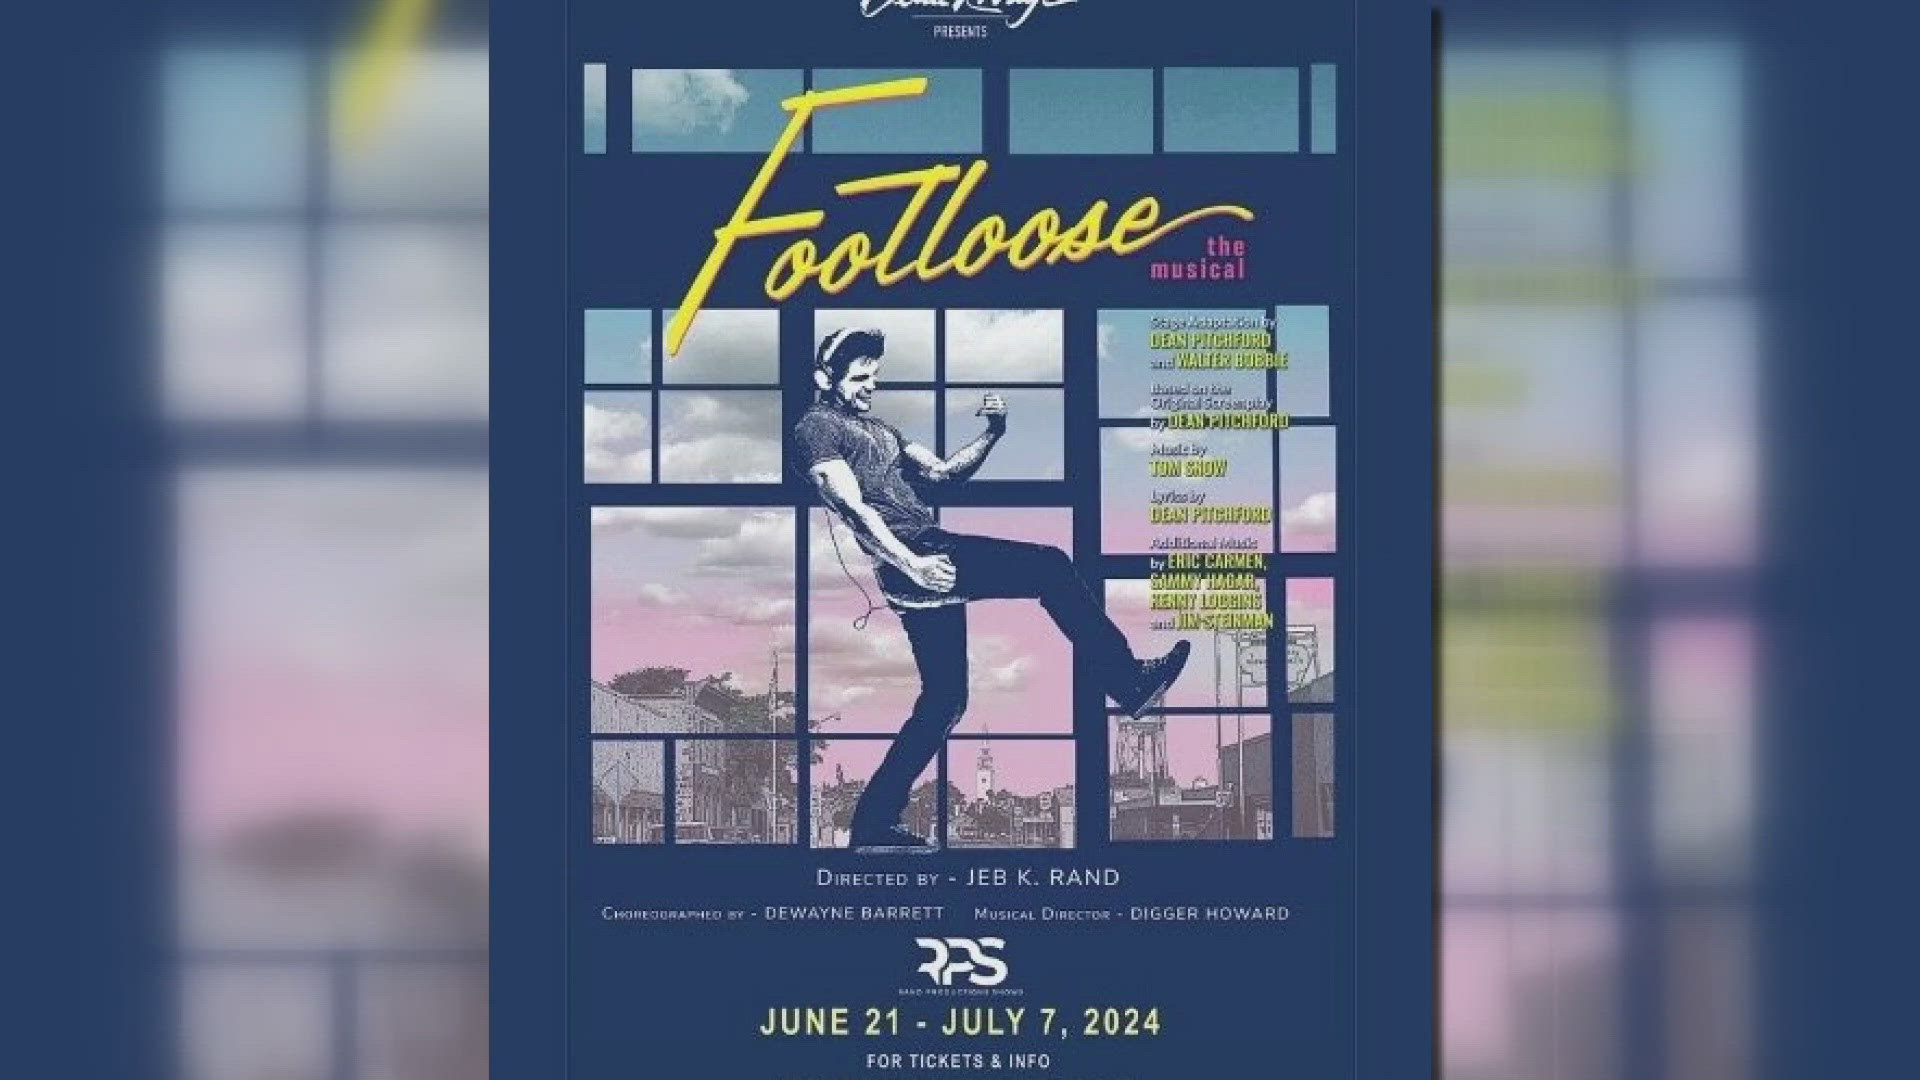 This year marks the 40th anniversary of the Footloose movie and 25th anniversary of Beau Rivage, and this is the perfect reason to invite viewers to Mississippi.